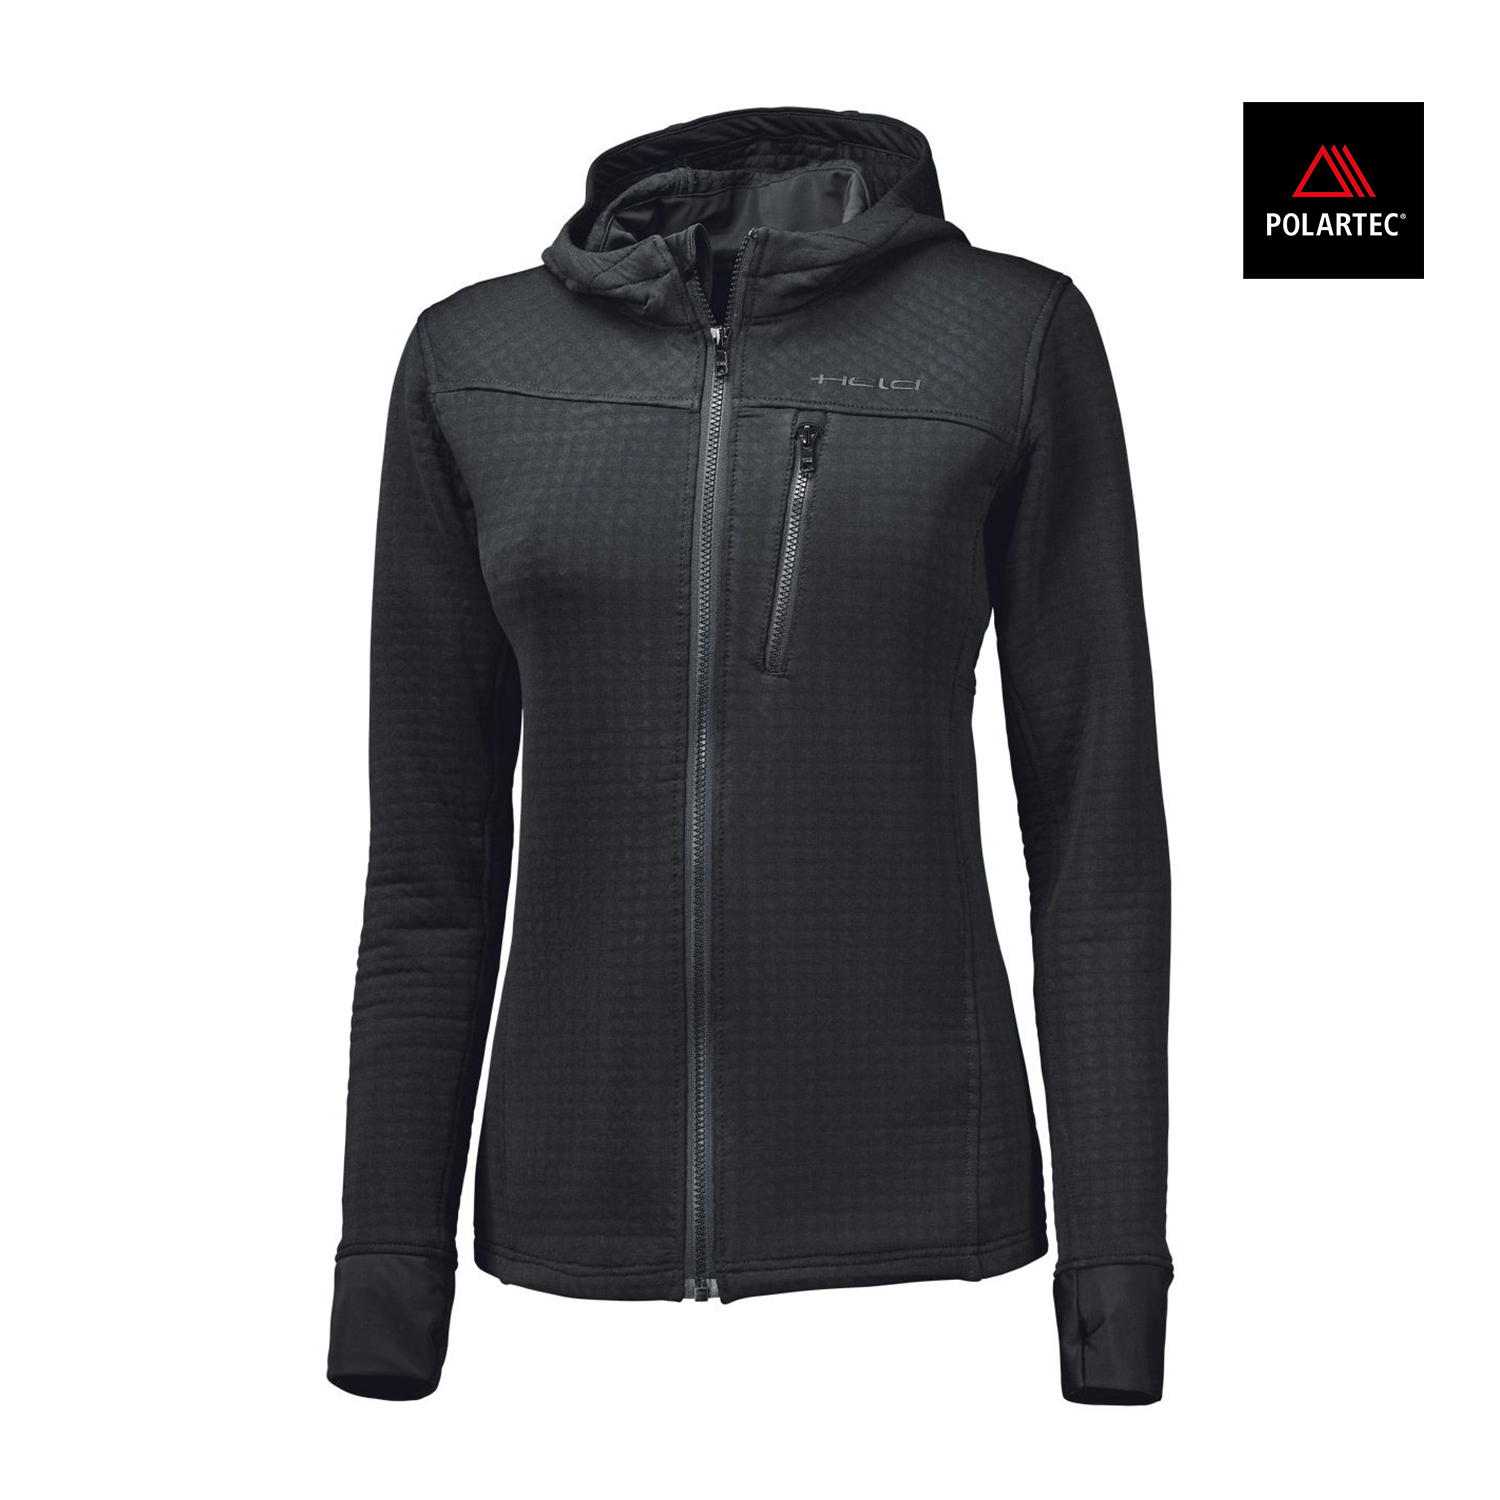 Held Polar Jacket Womens Black - Available in Various Sizes